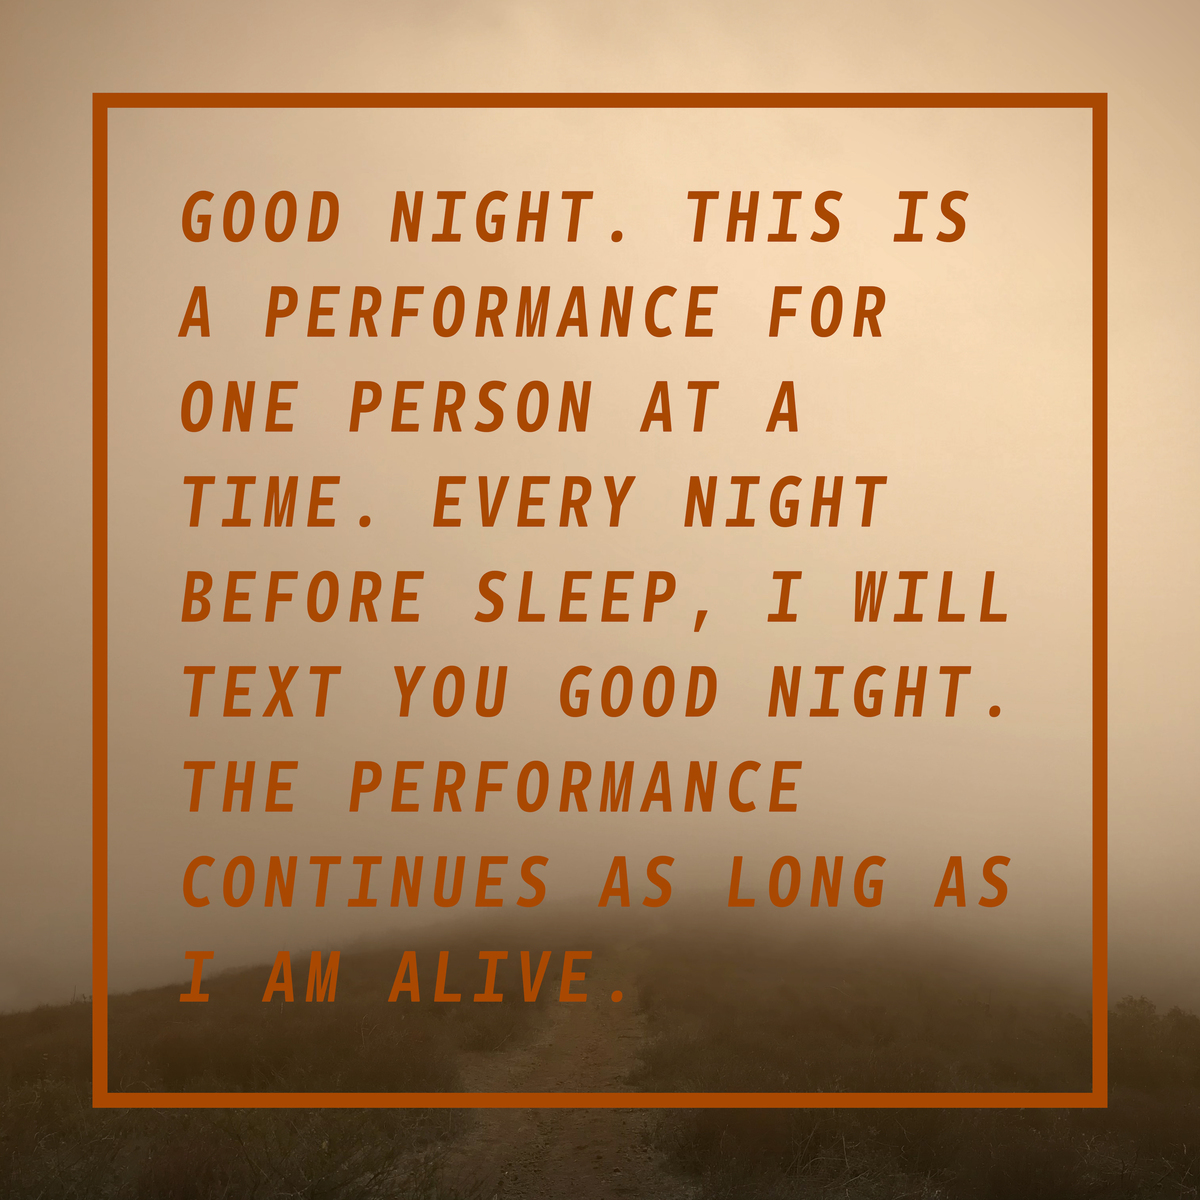 A square image featuring a text in red capital letters outlining the rules of the Good Night performance